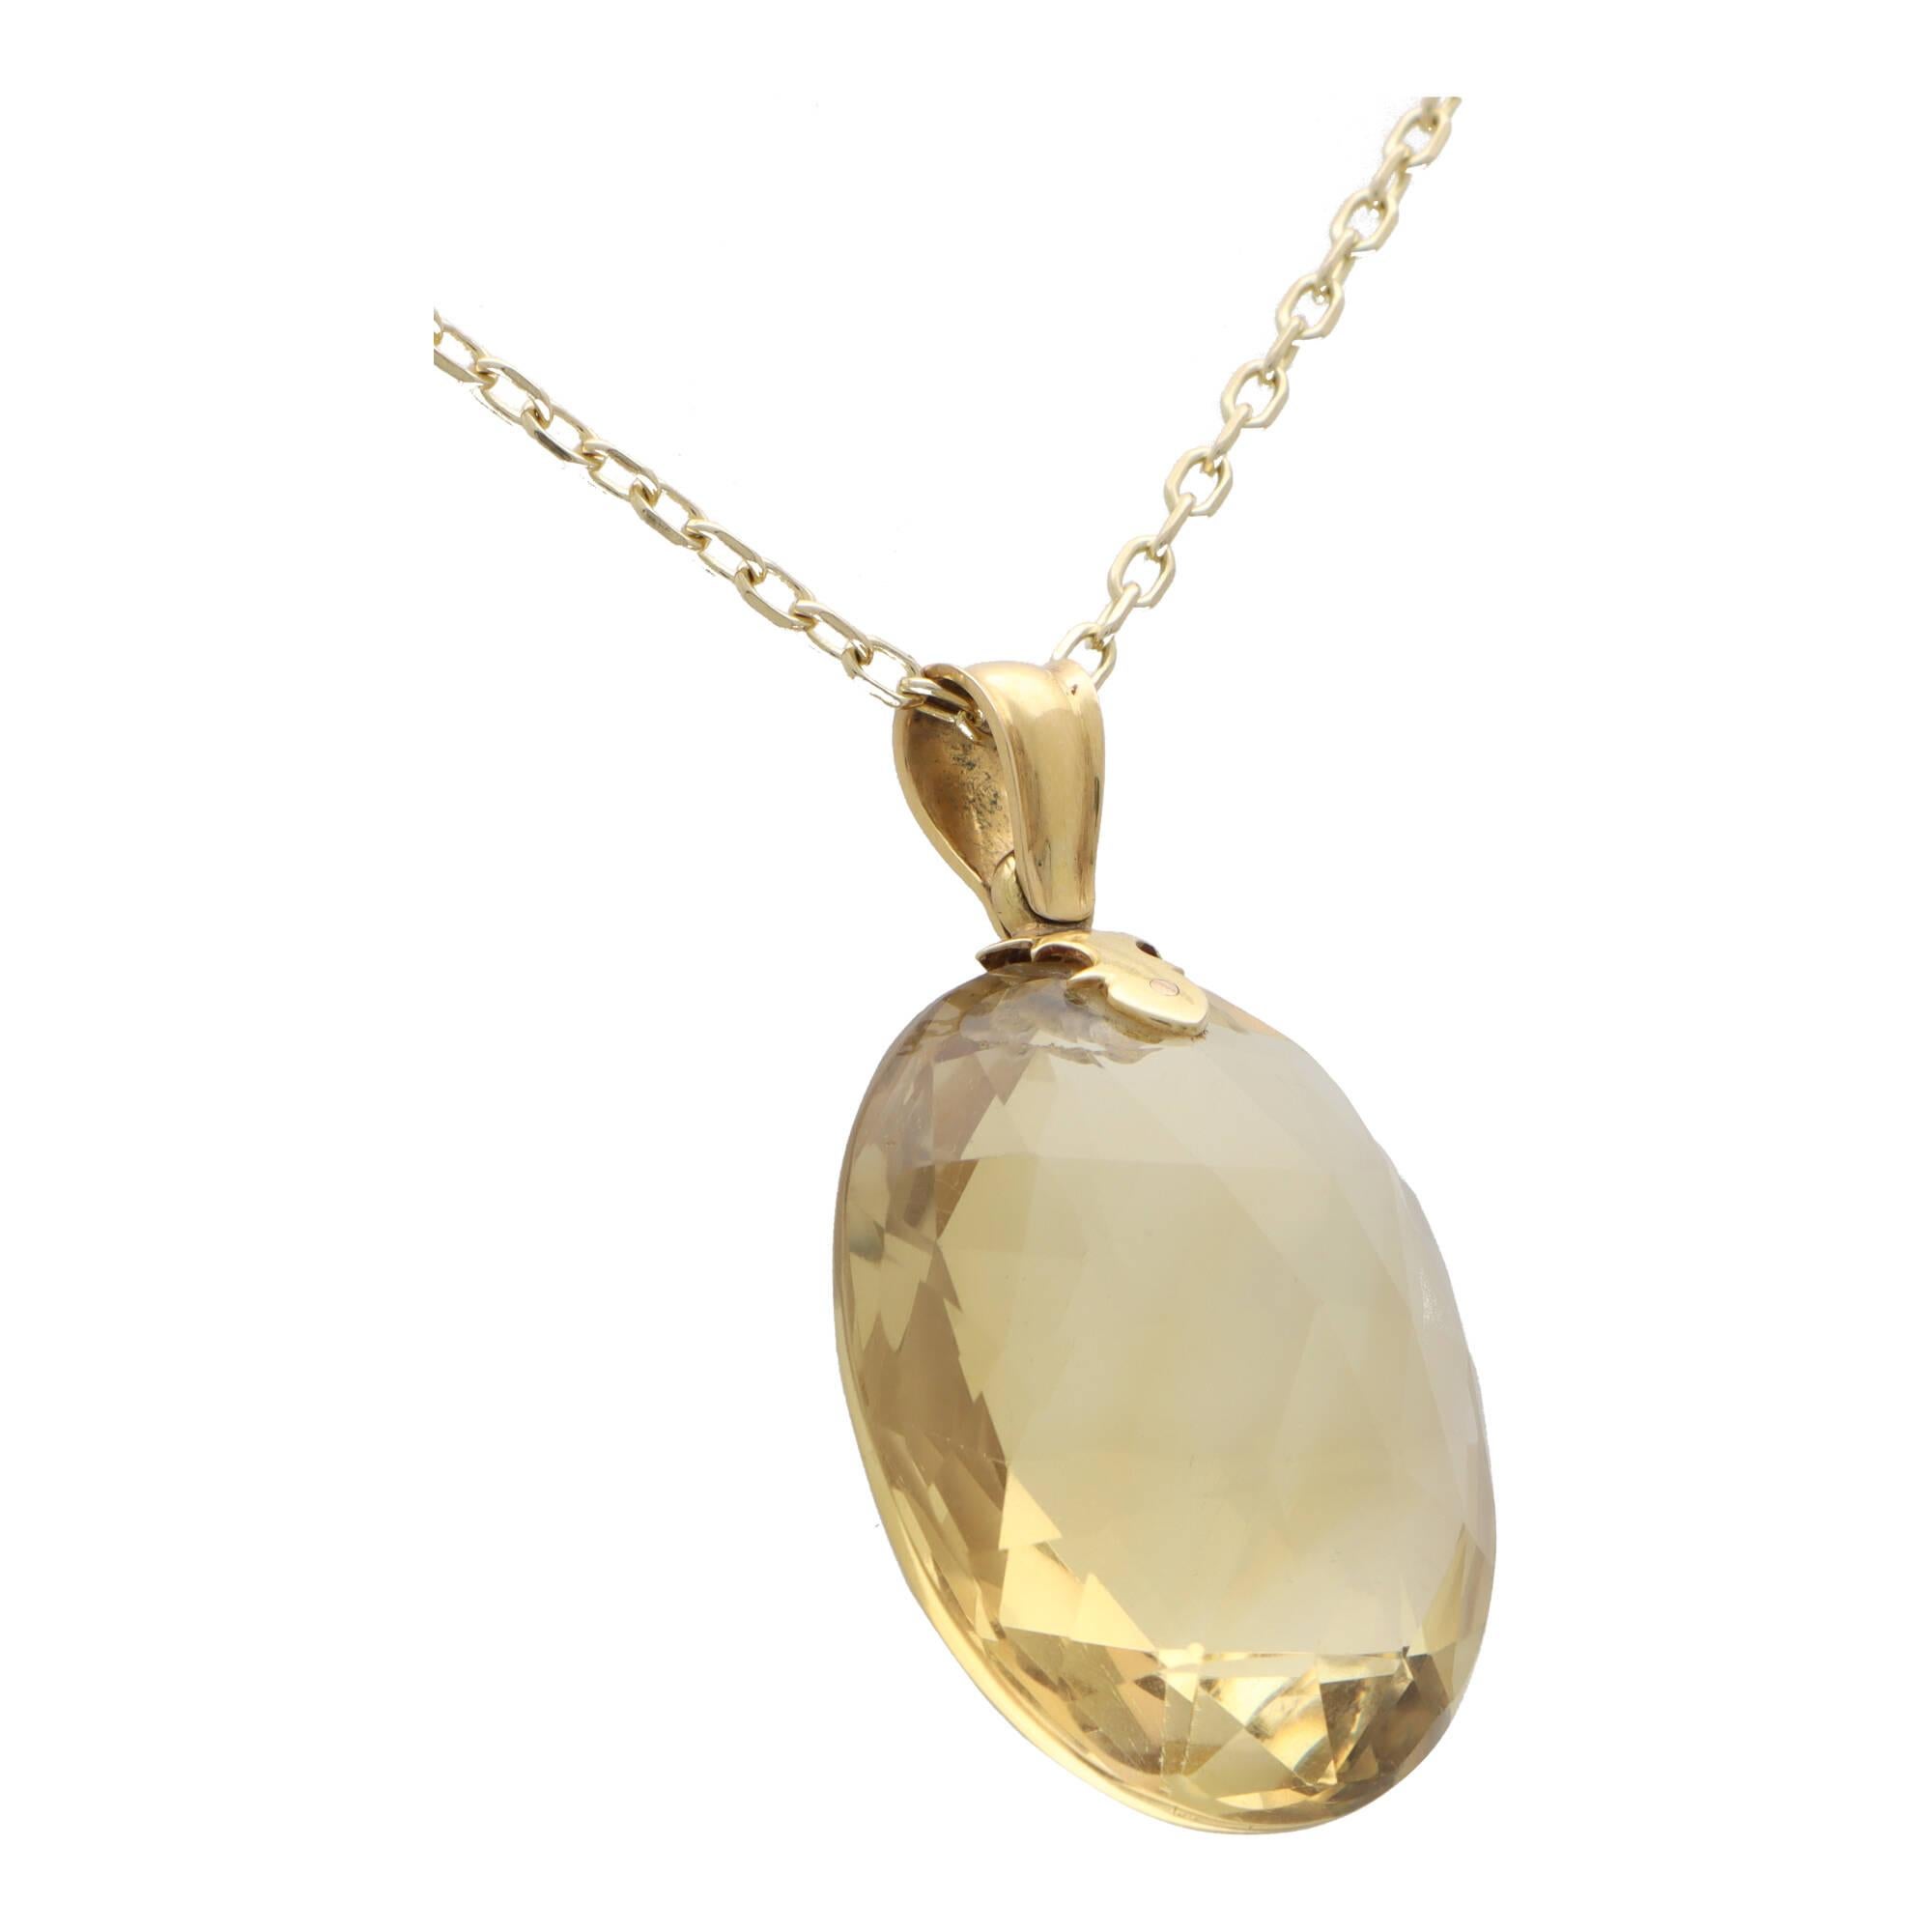 Oval Cut Vintage 100.39 Carat Citrine Pendant Necklace Set in 9k Yellow Gold